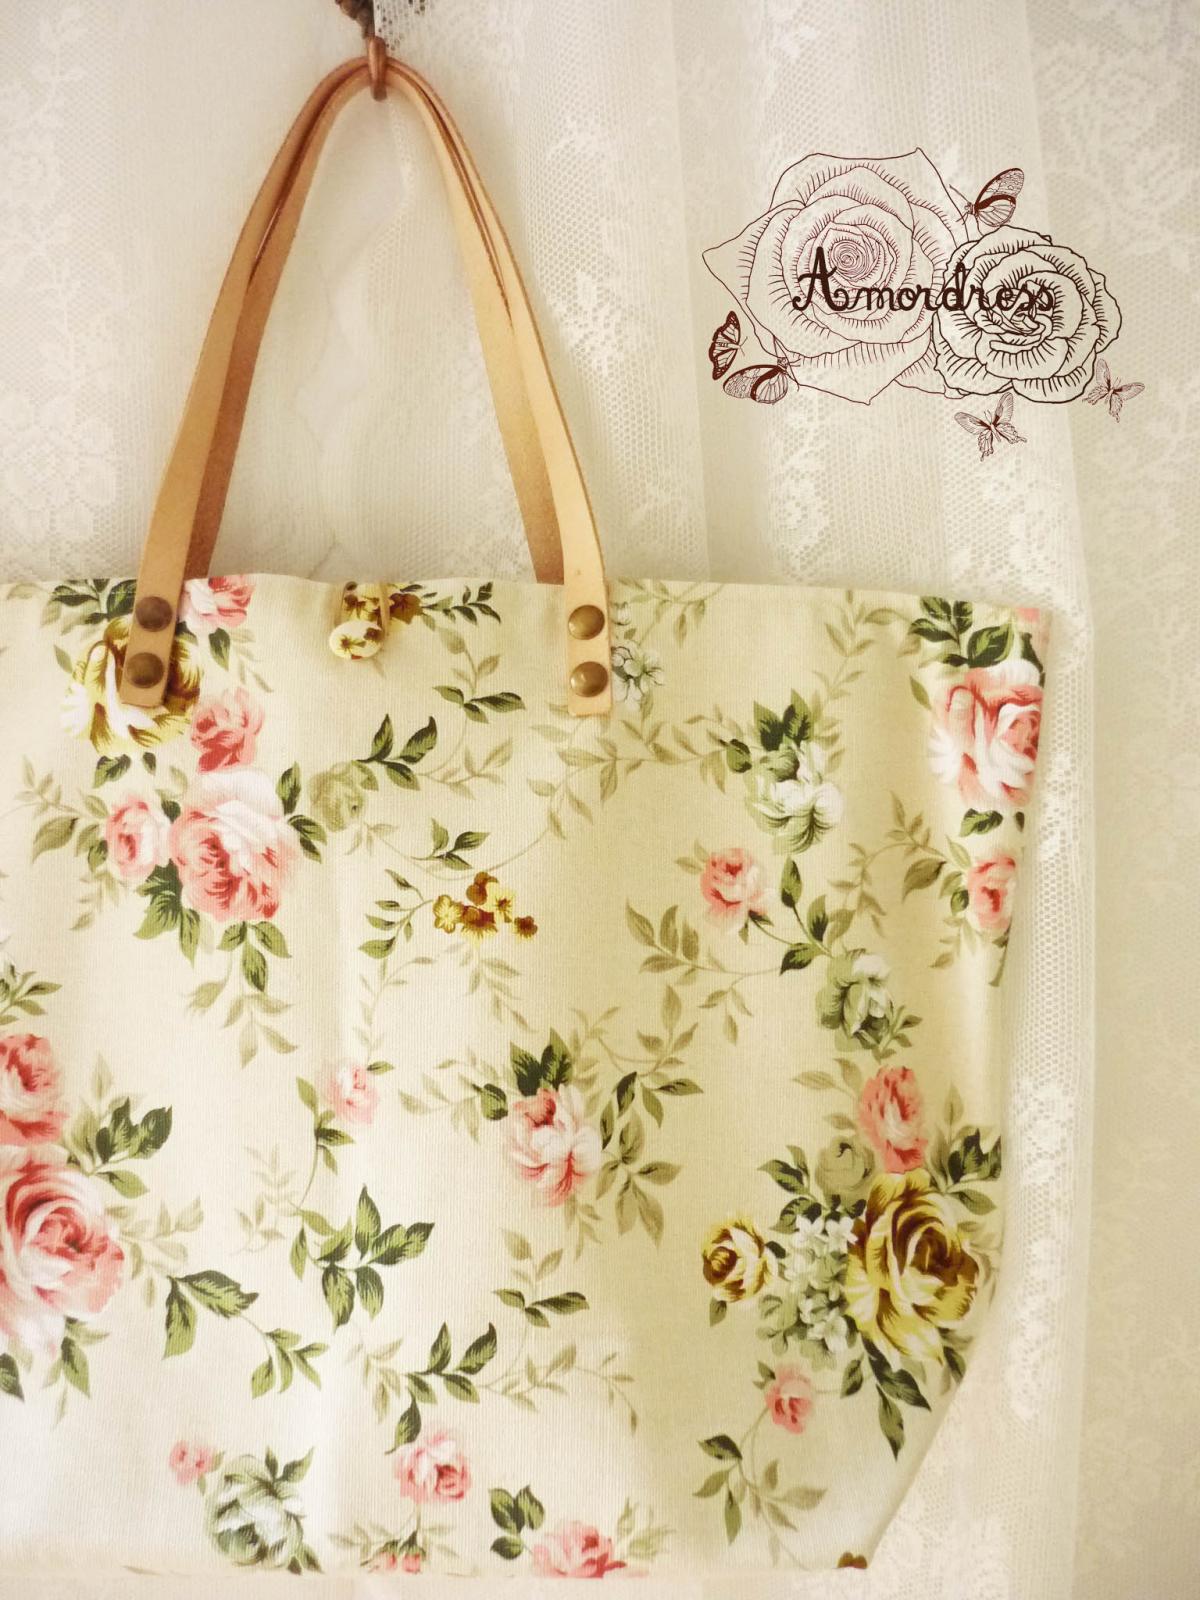 Floral Tote Bag Printed Canvas Bag Genuine Leather Strap Light Khaki with Pink Rose Shabby Chic Bag ...Amor The Inspired Collection...